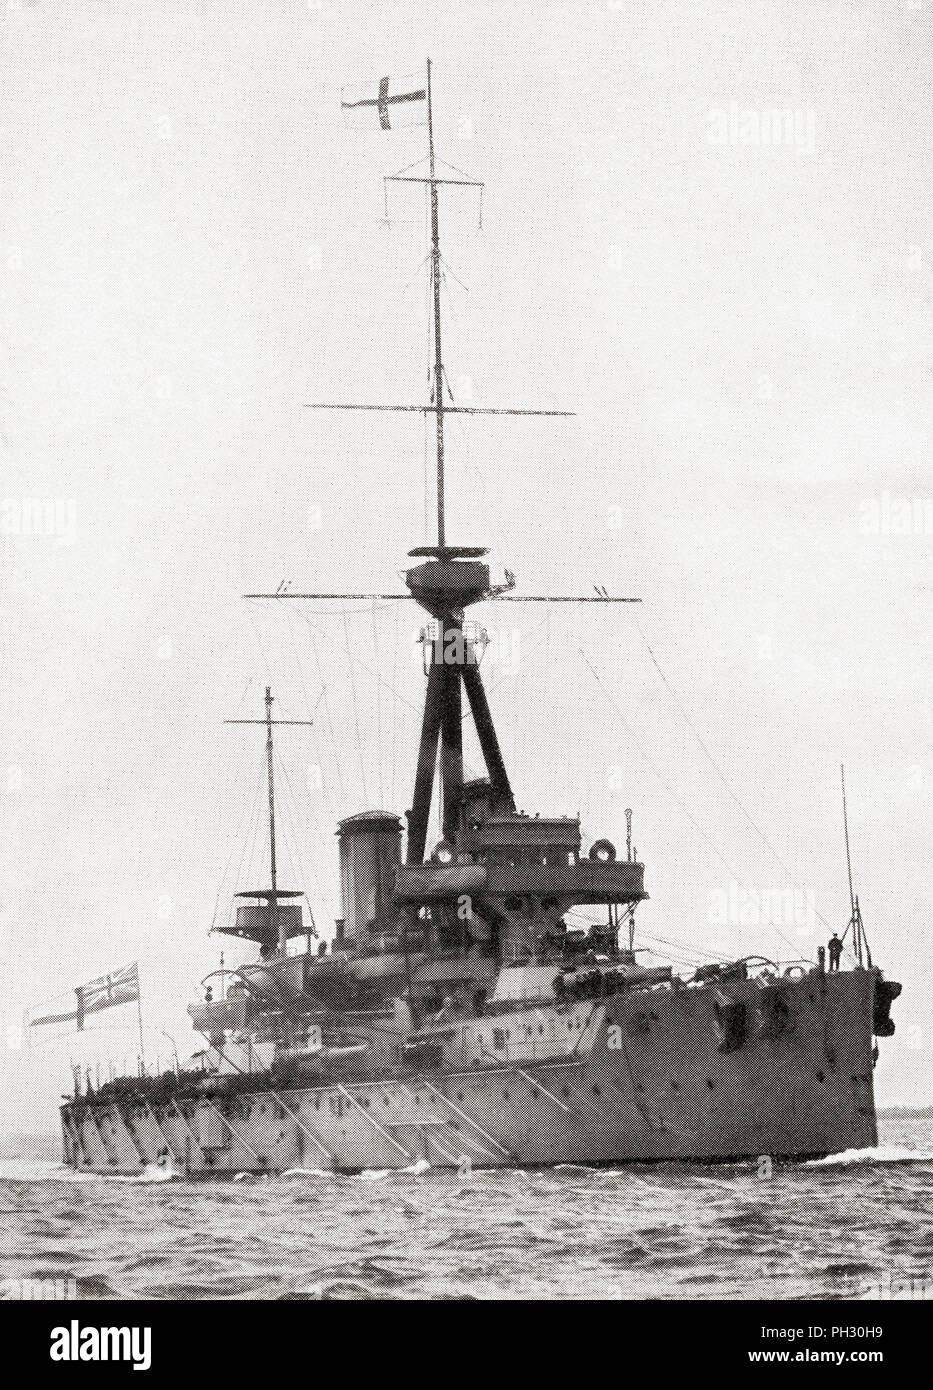 The British Royal Navy battleship HMS Dreadnought, (1906).  From The Book of Ships, published c.1920. Stock Photo